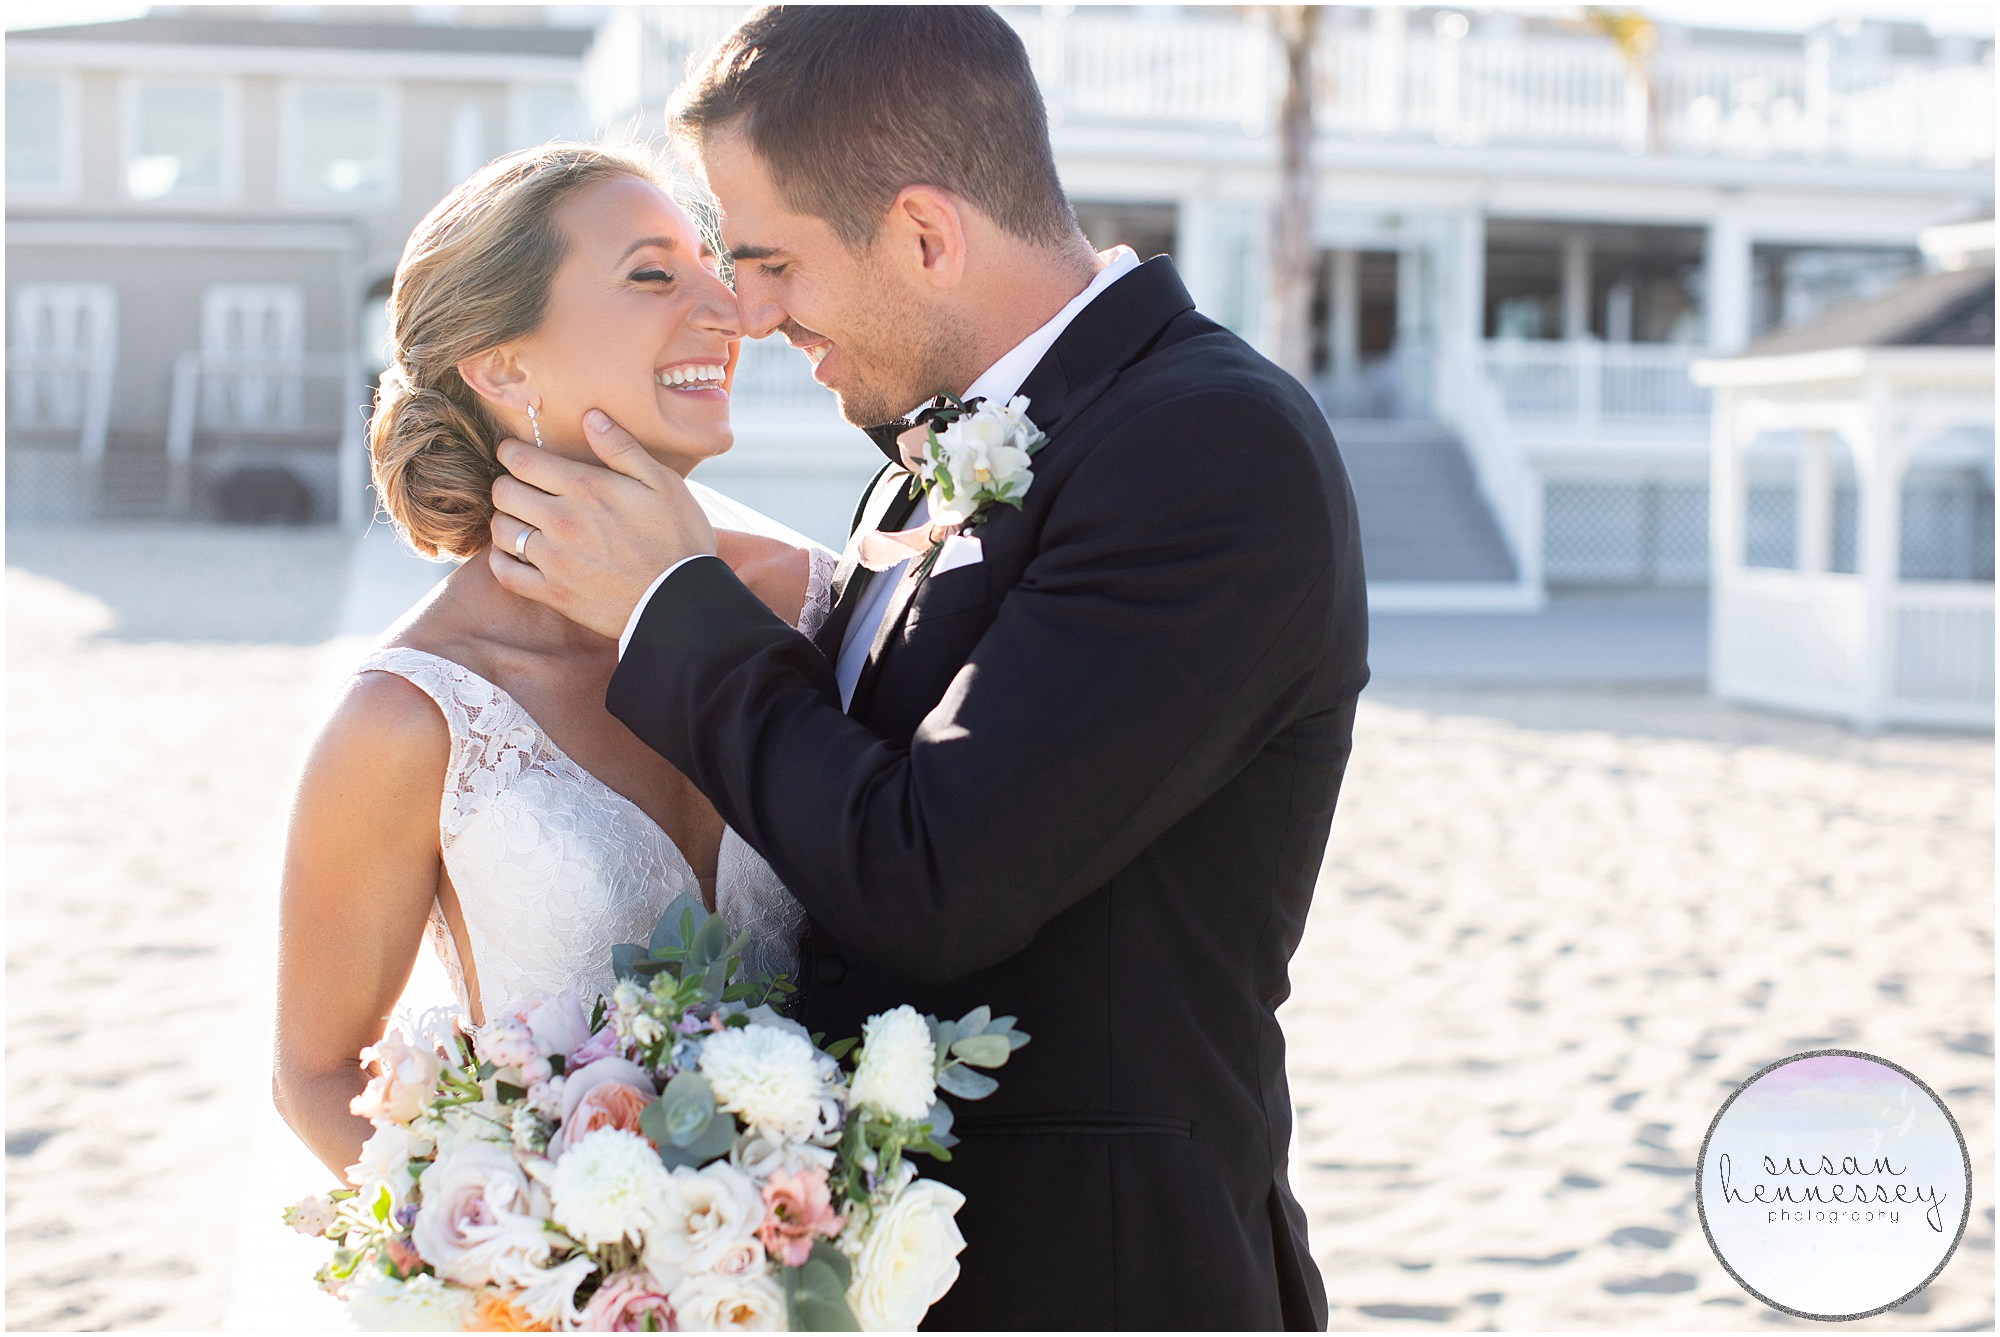 Susan Hennessey Photography Presents Best of 2019 Weddings!